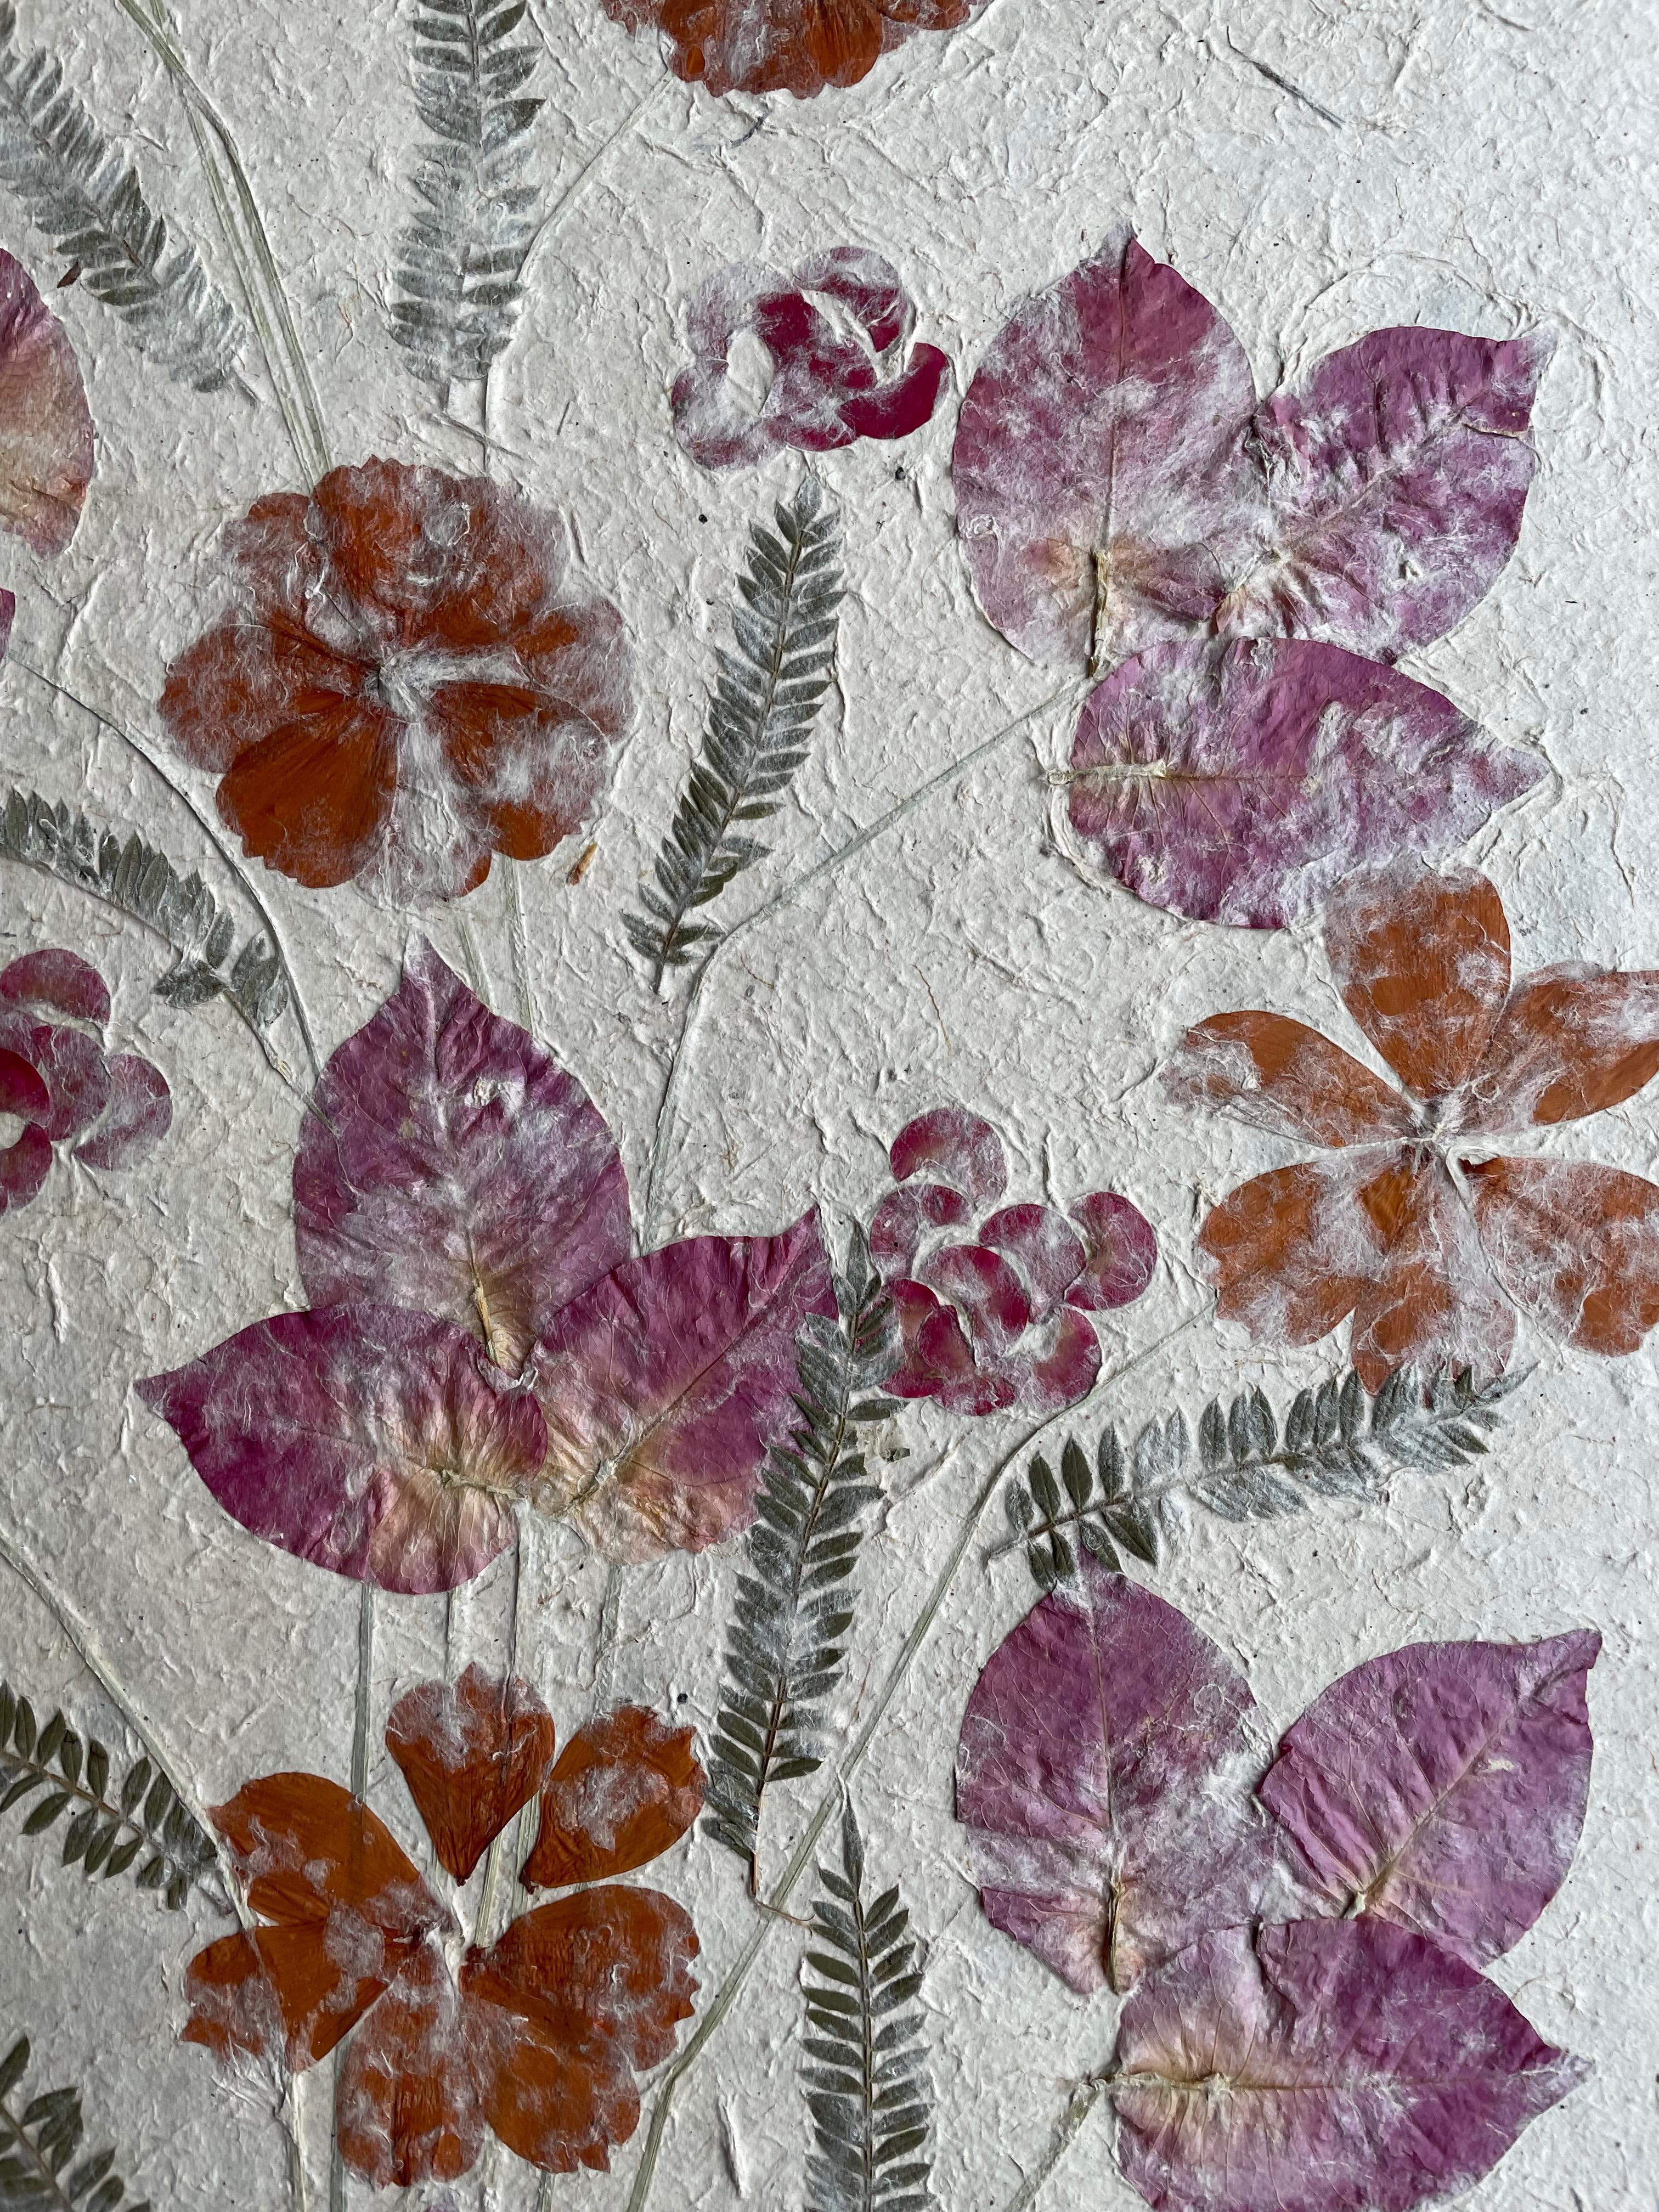 Madagascan Dried Flowers On Hand Made Paper - Outsider Art Art by Unknown